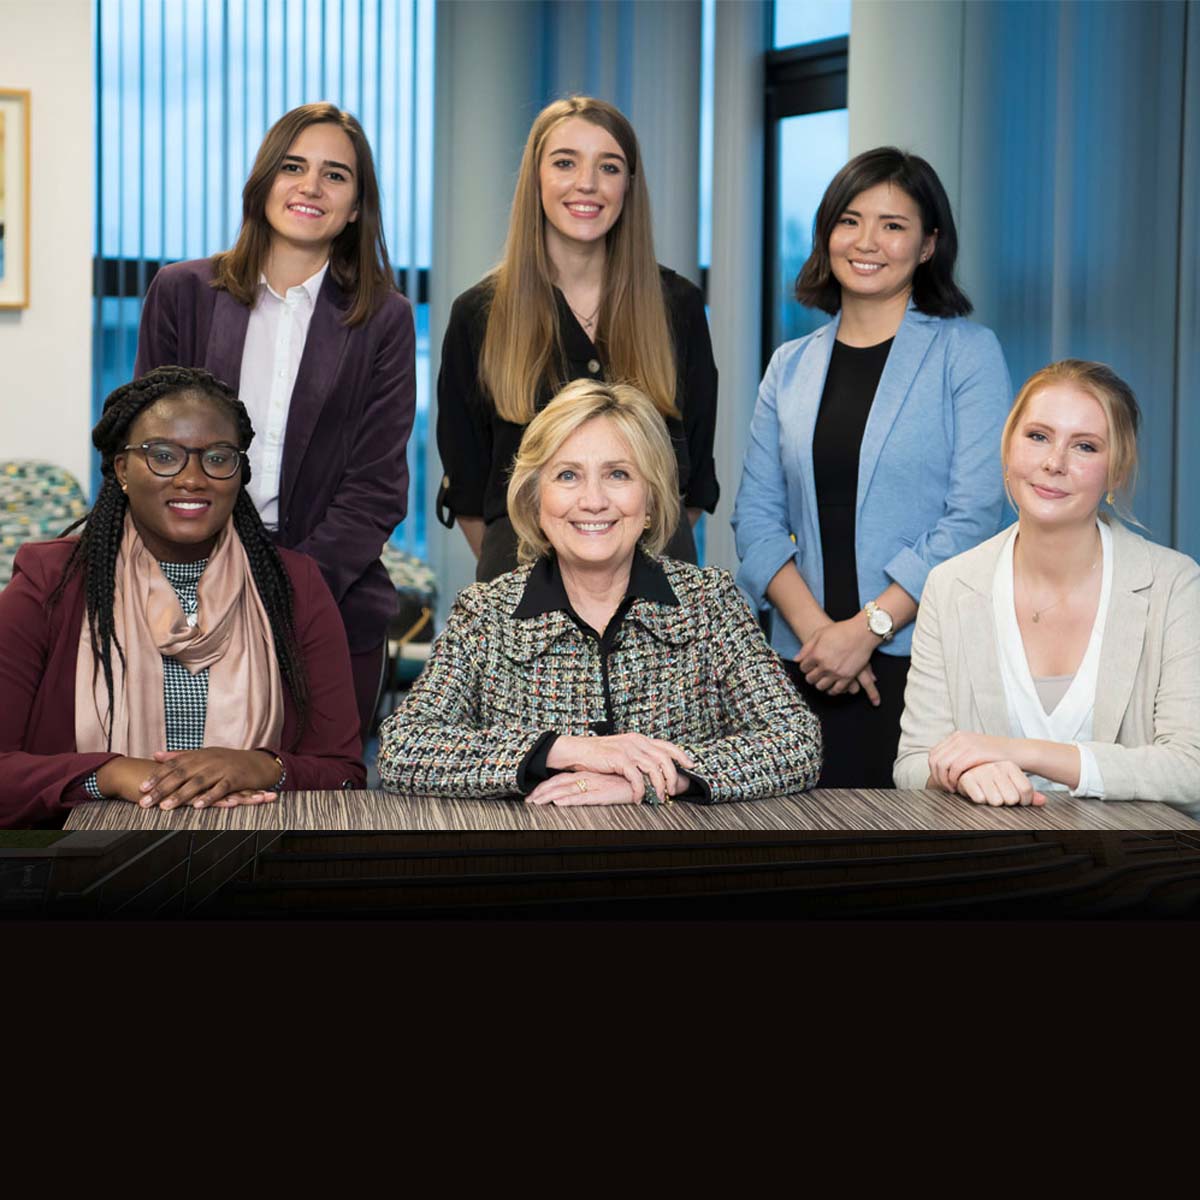 The first cohort of Clinton Scholars with Hillary Clinton